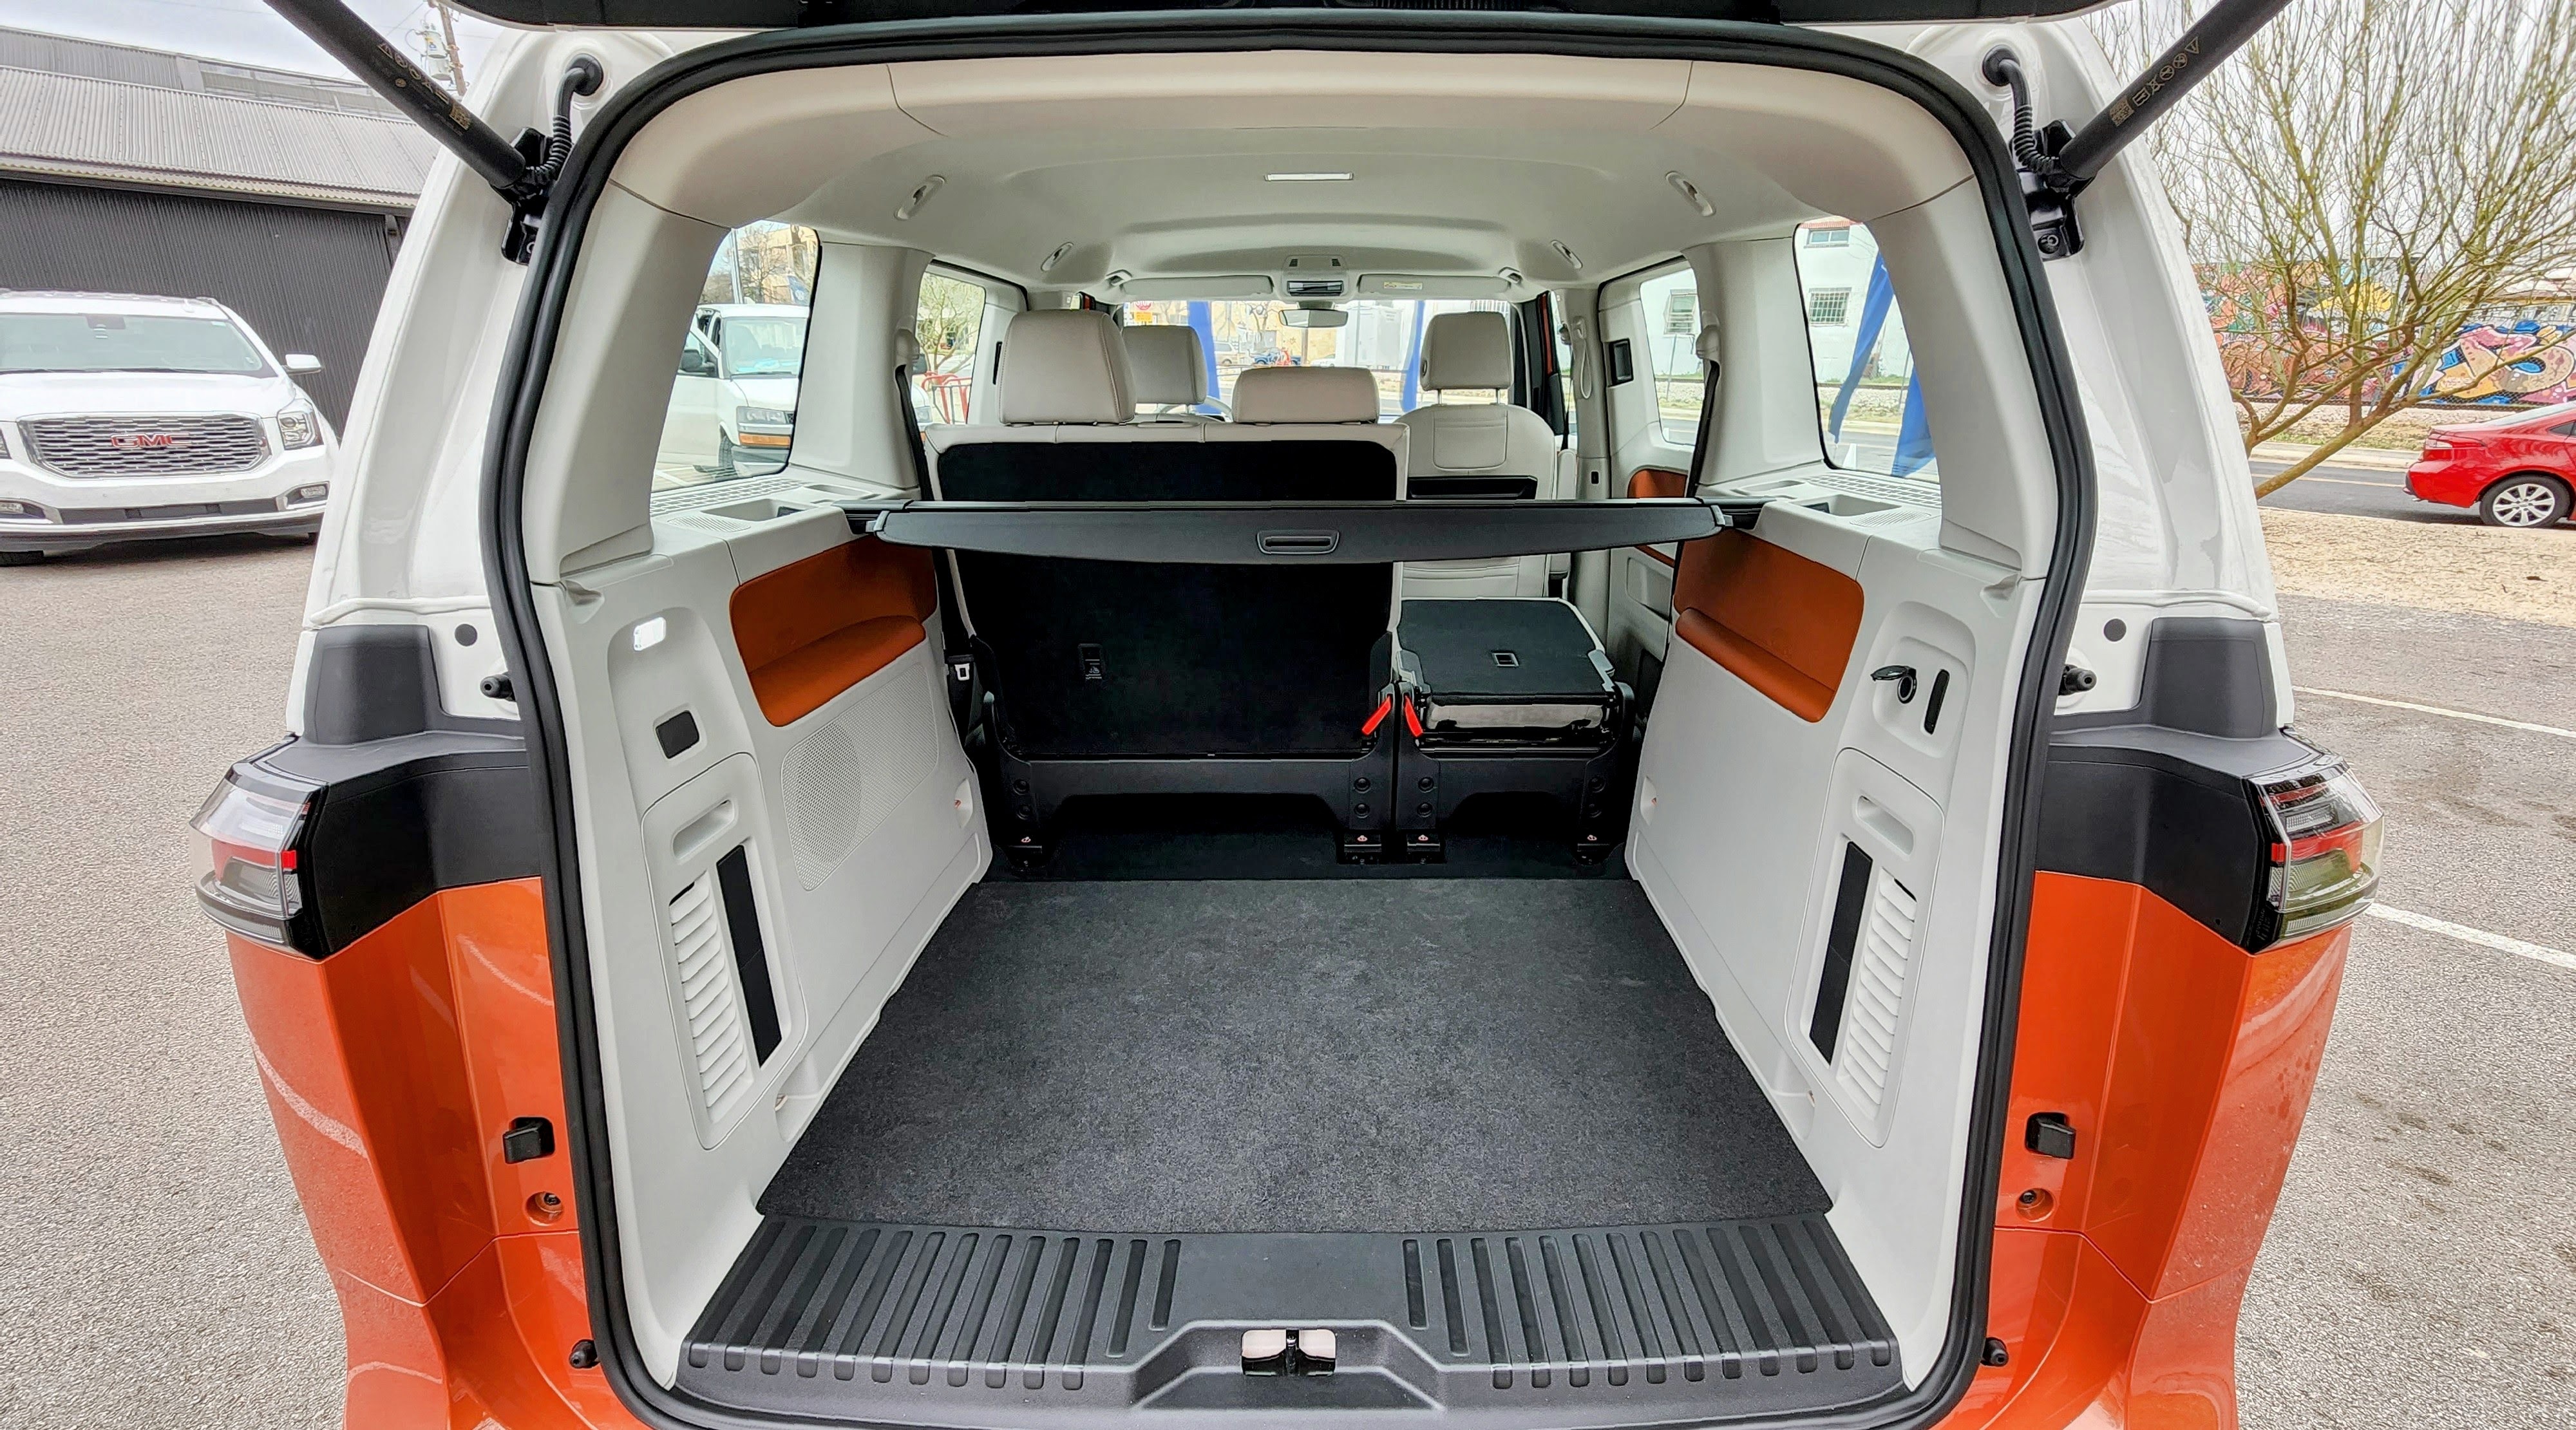 View of the cargo space from the open trunk